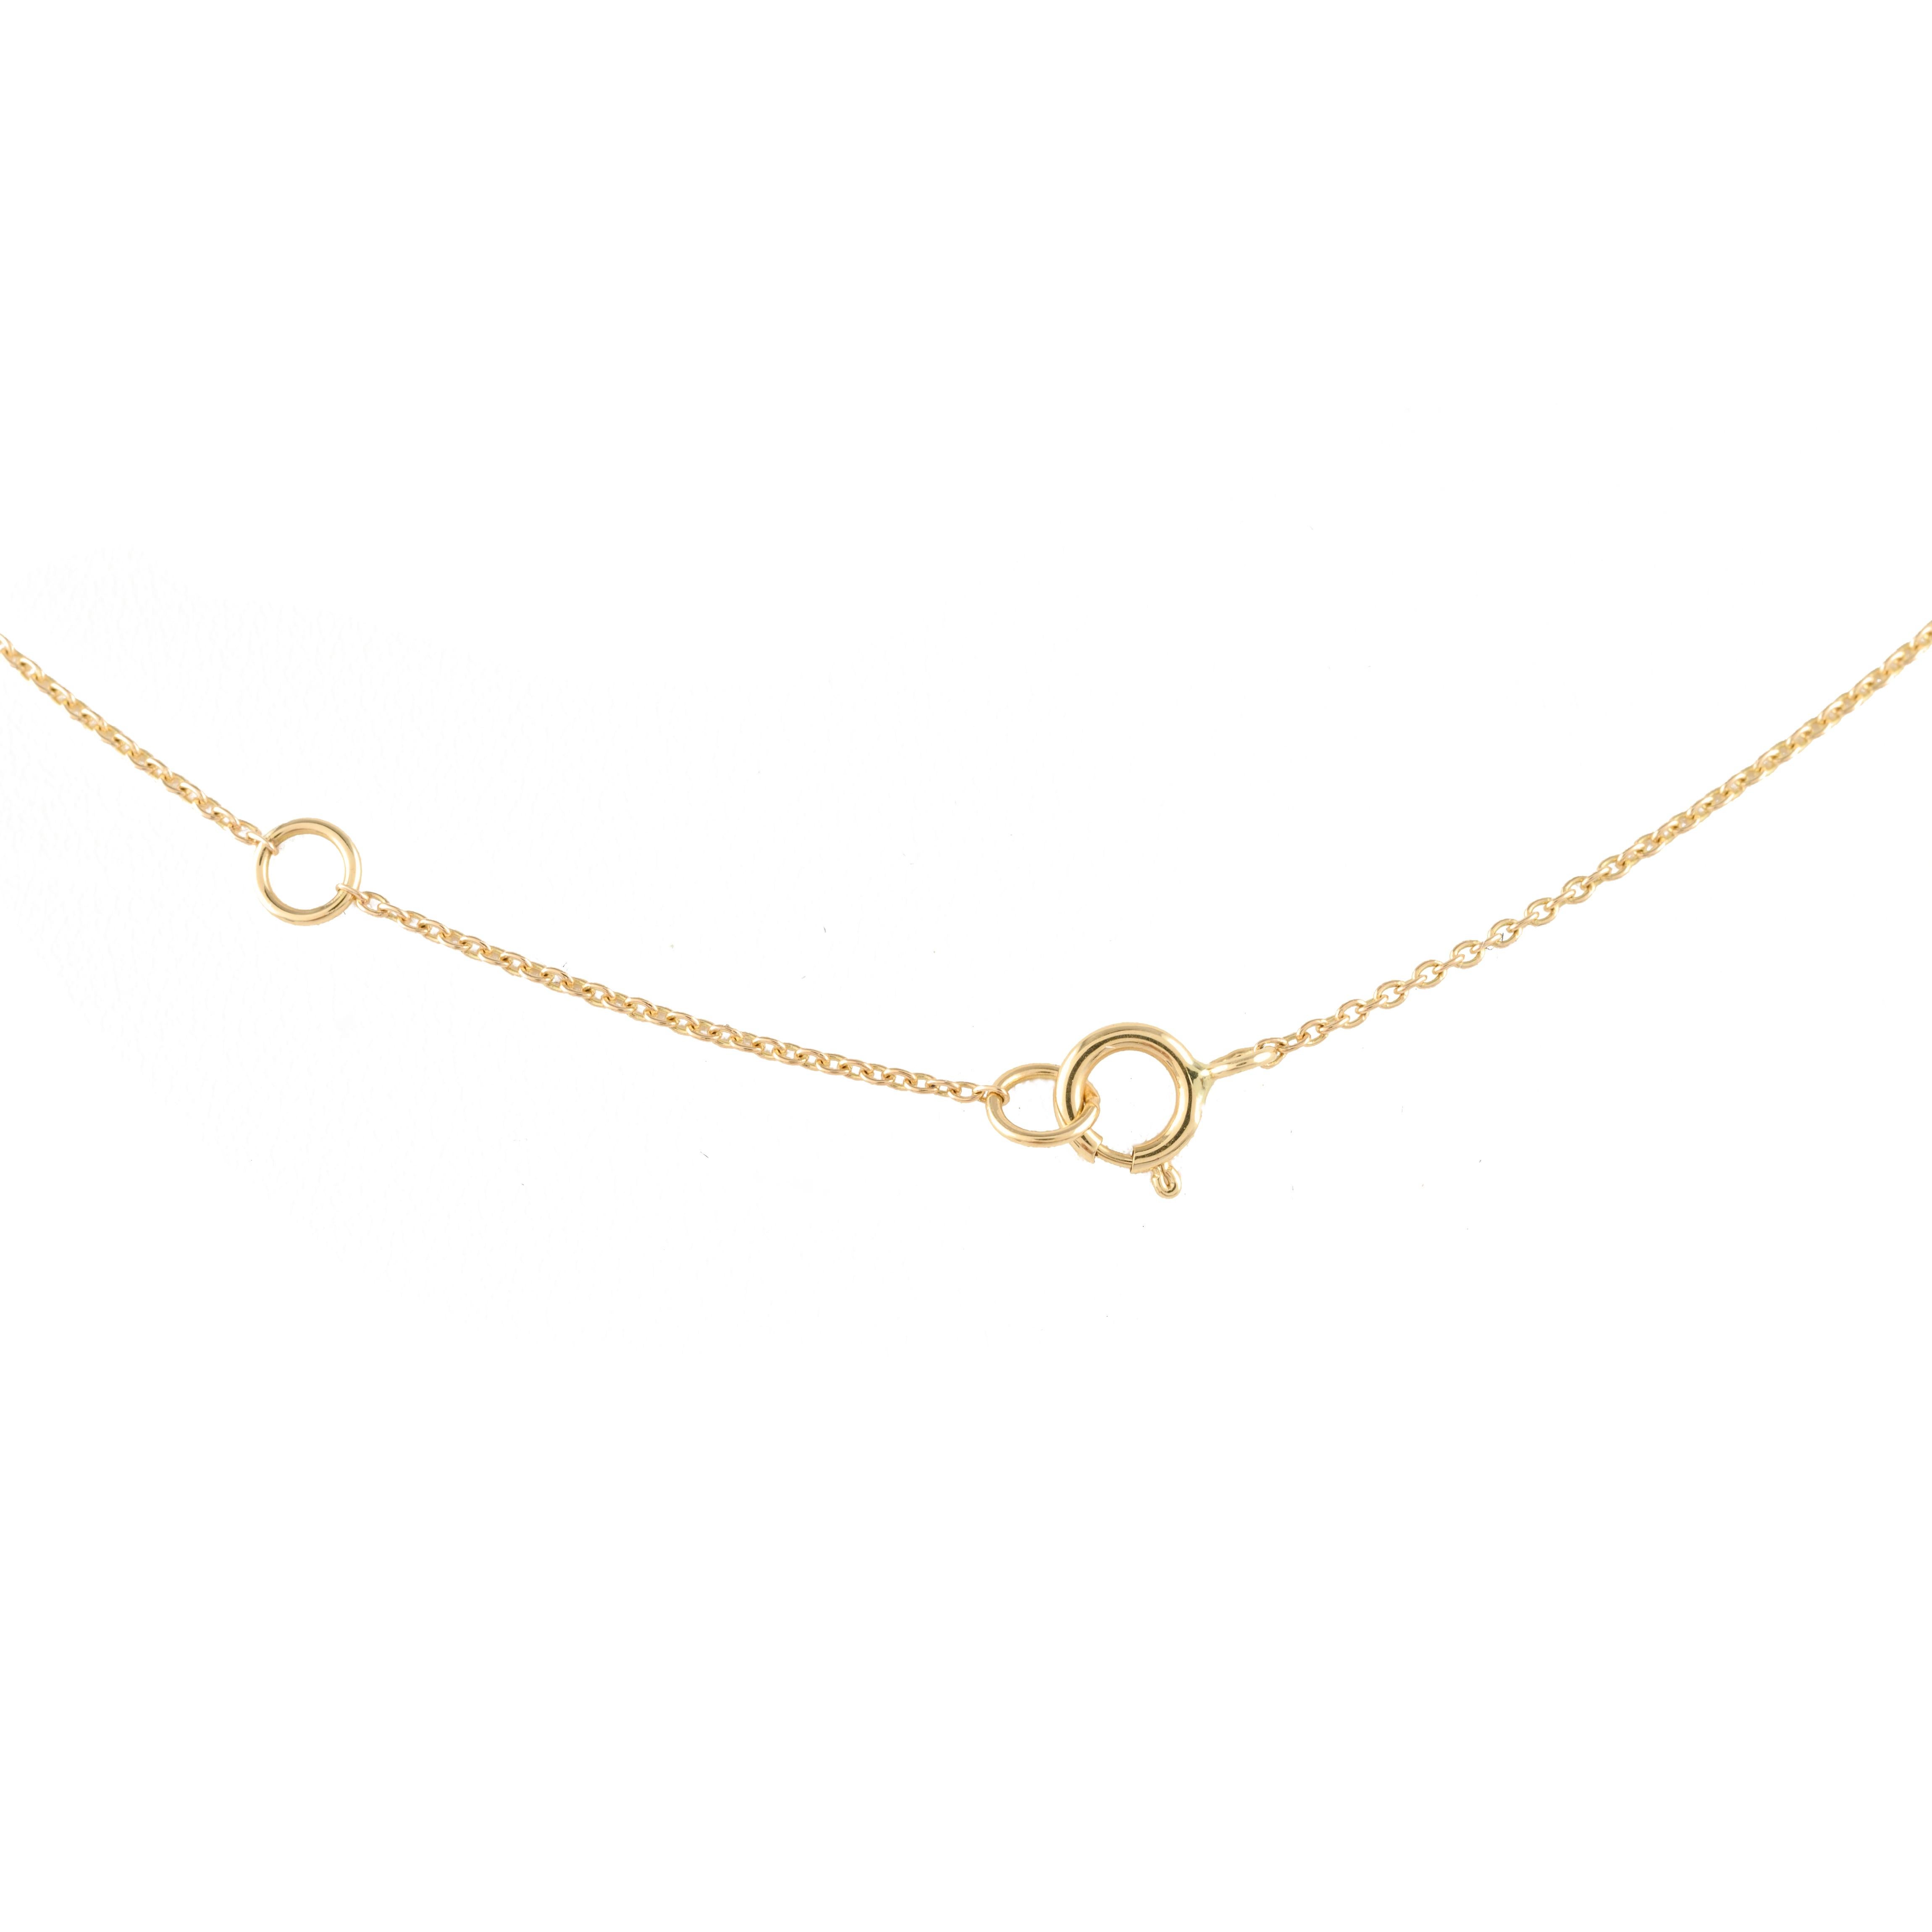 Rainbow Moonstone Chain Necklace Gift for Girlfriend in 18k Solid Yellow Gold For Sale 2